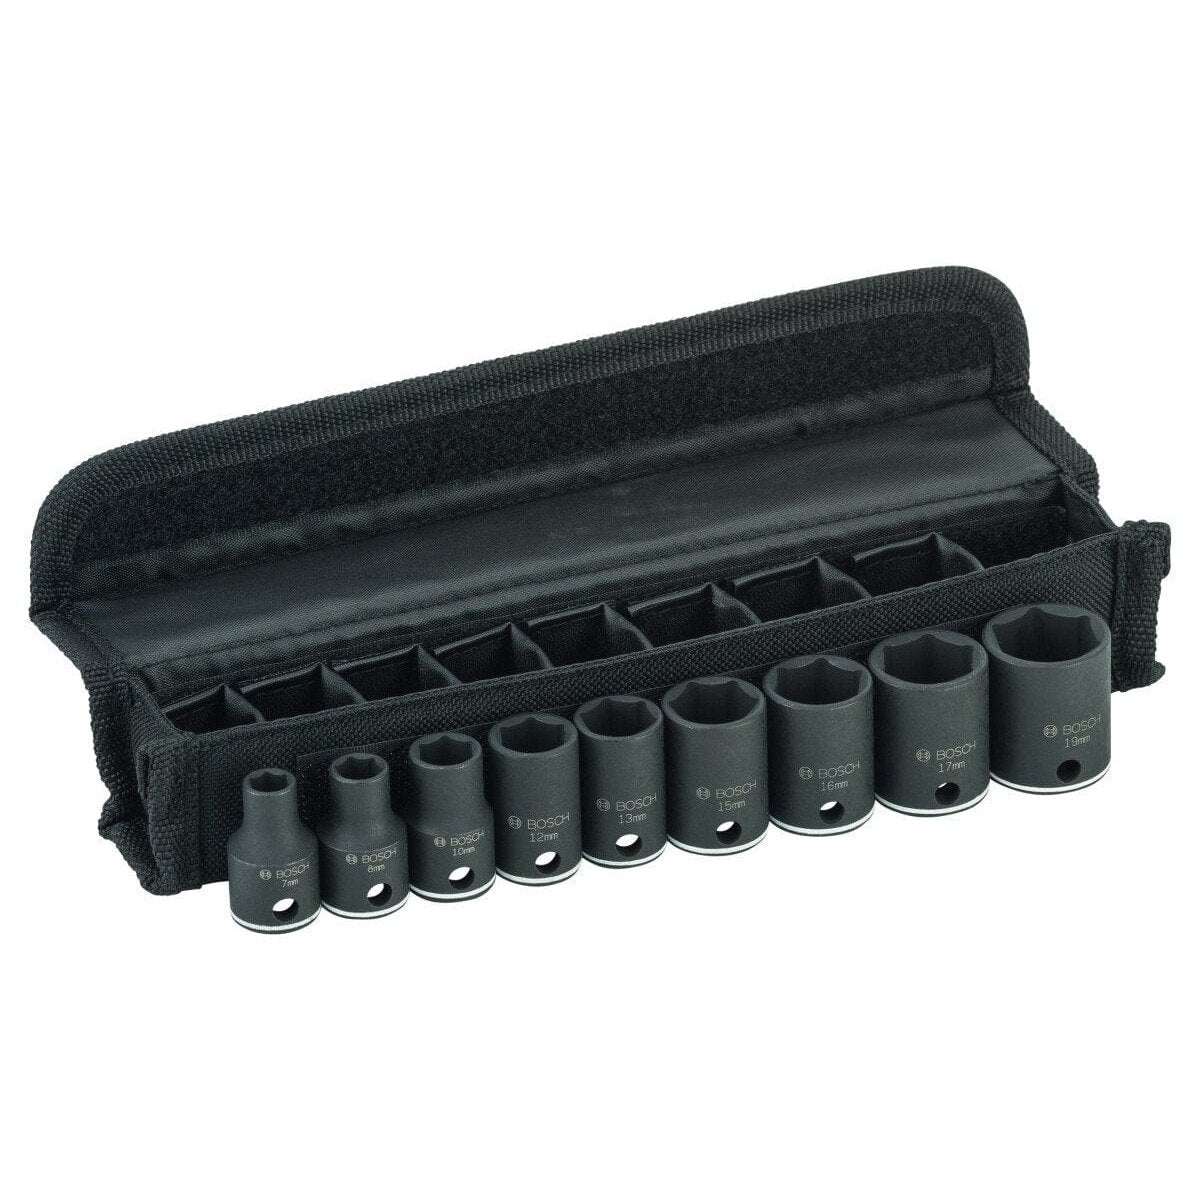 Upgrade your toolkit with the Bosch 9-Piece 30mm Deep Impact Socket Set (2608551098) at SupplyMaster.store in Ghana. Sockets & Hex Keys Buy Tools hardware Building materials